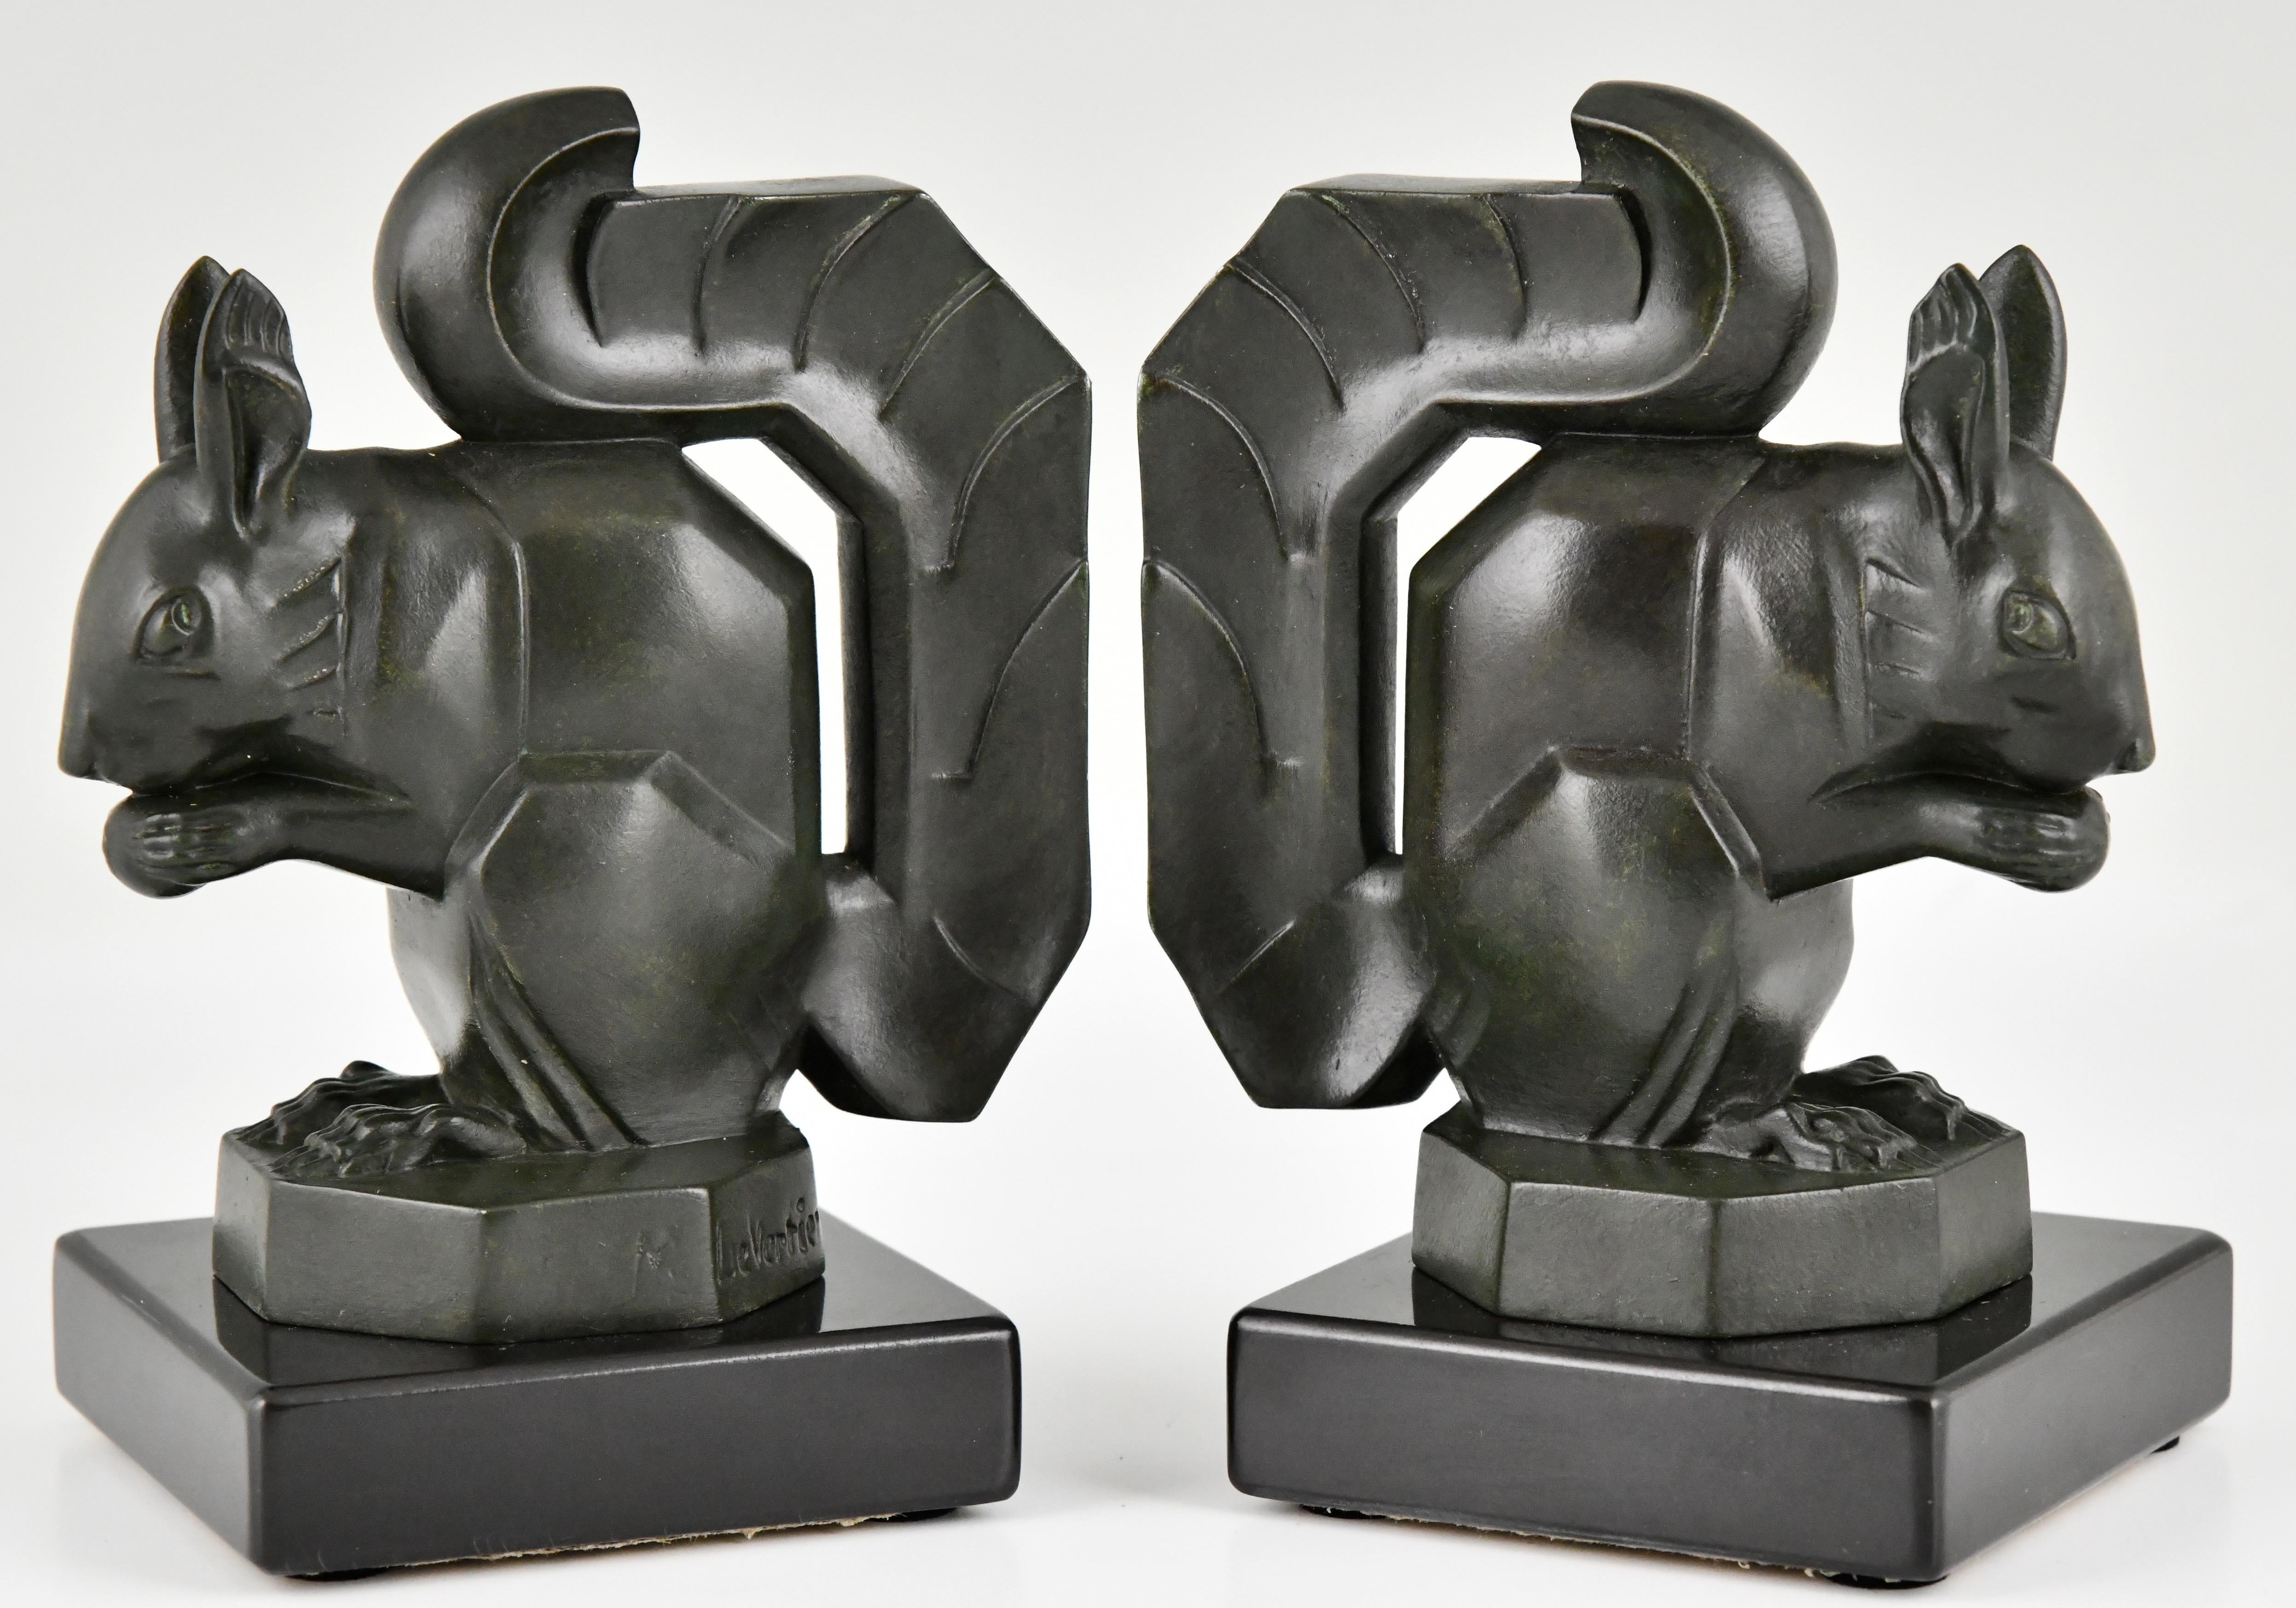 Art Deco squirrel bookends by Max Le Verrier
Art metal, dark green patina.
Belgian Black marble bases.
France 1930